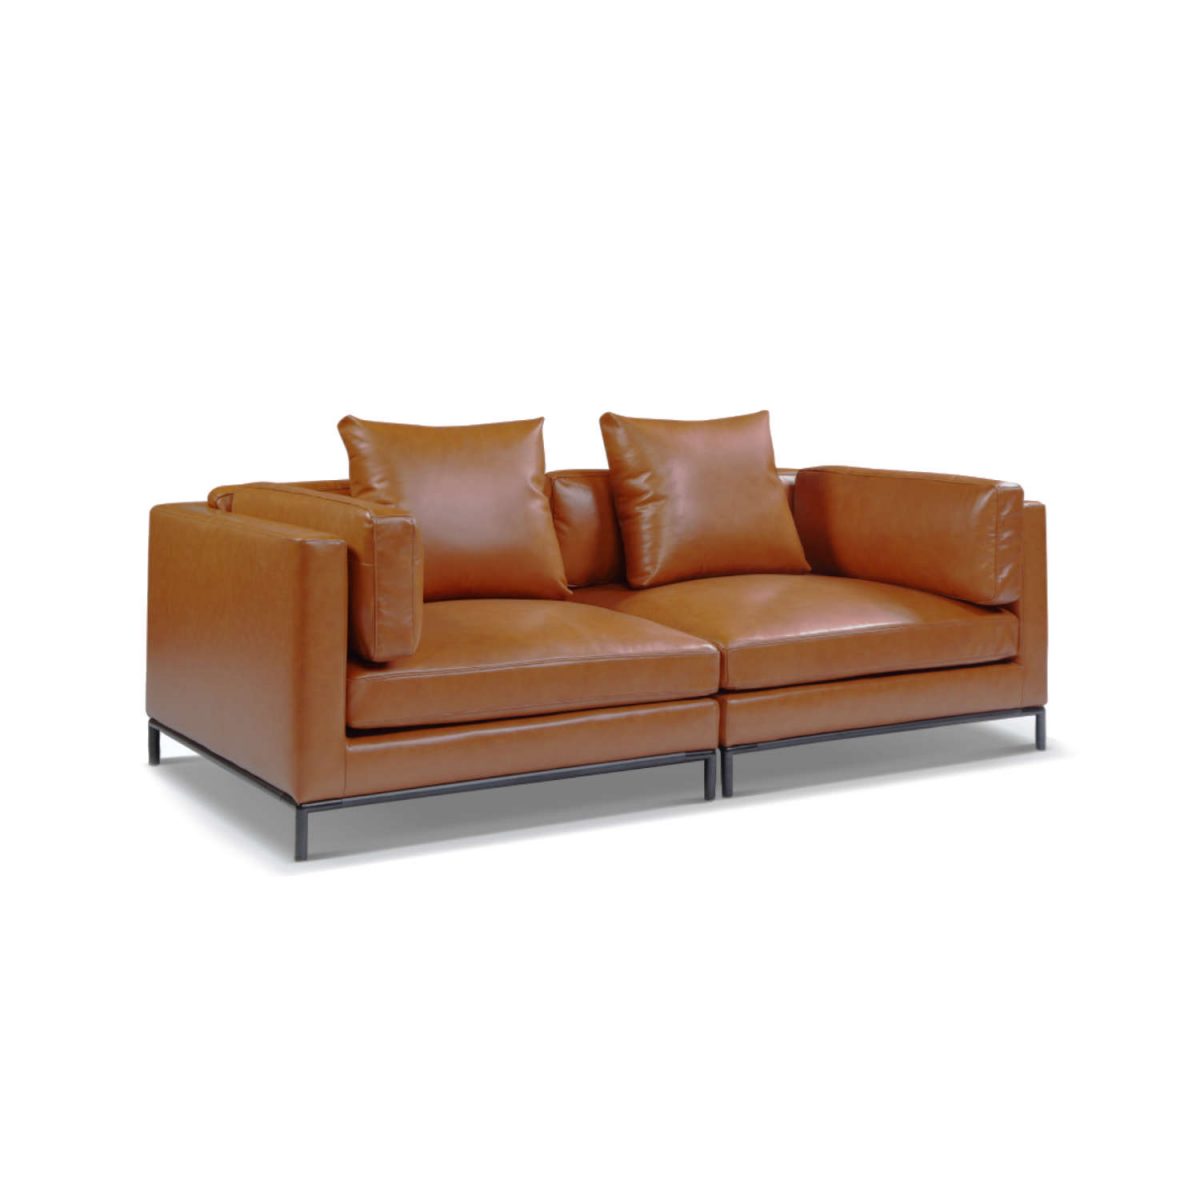 rod Human køre Migliore: Modern Love Seat Leather Sofa (US Only) - Expand Furniture -  Folding Tables, Smarter Wall Beds, Space Savers